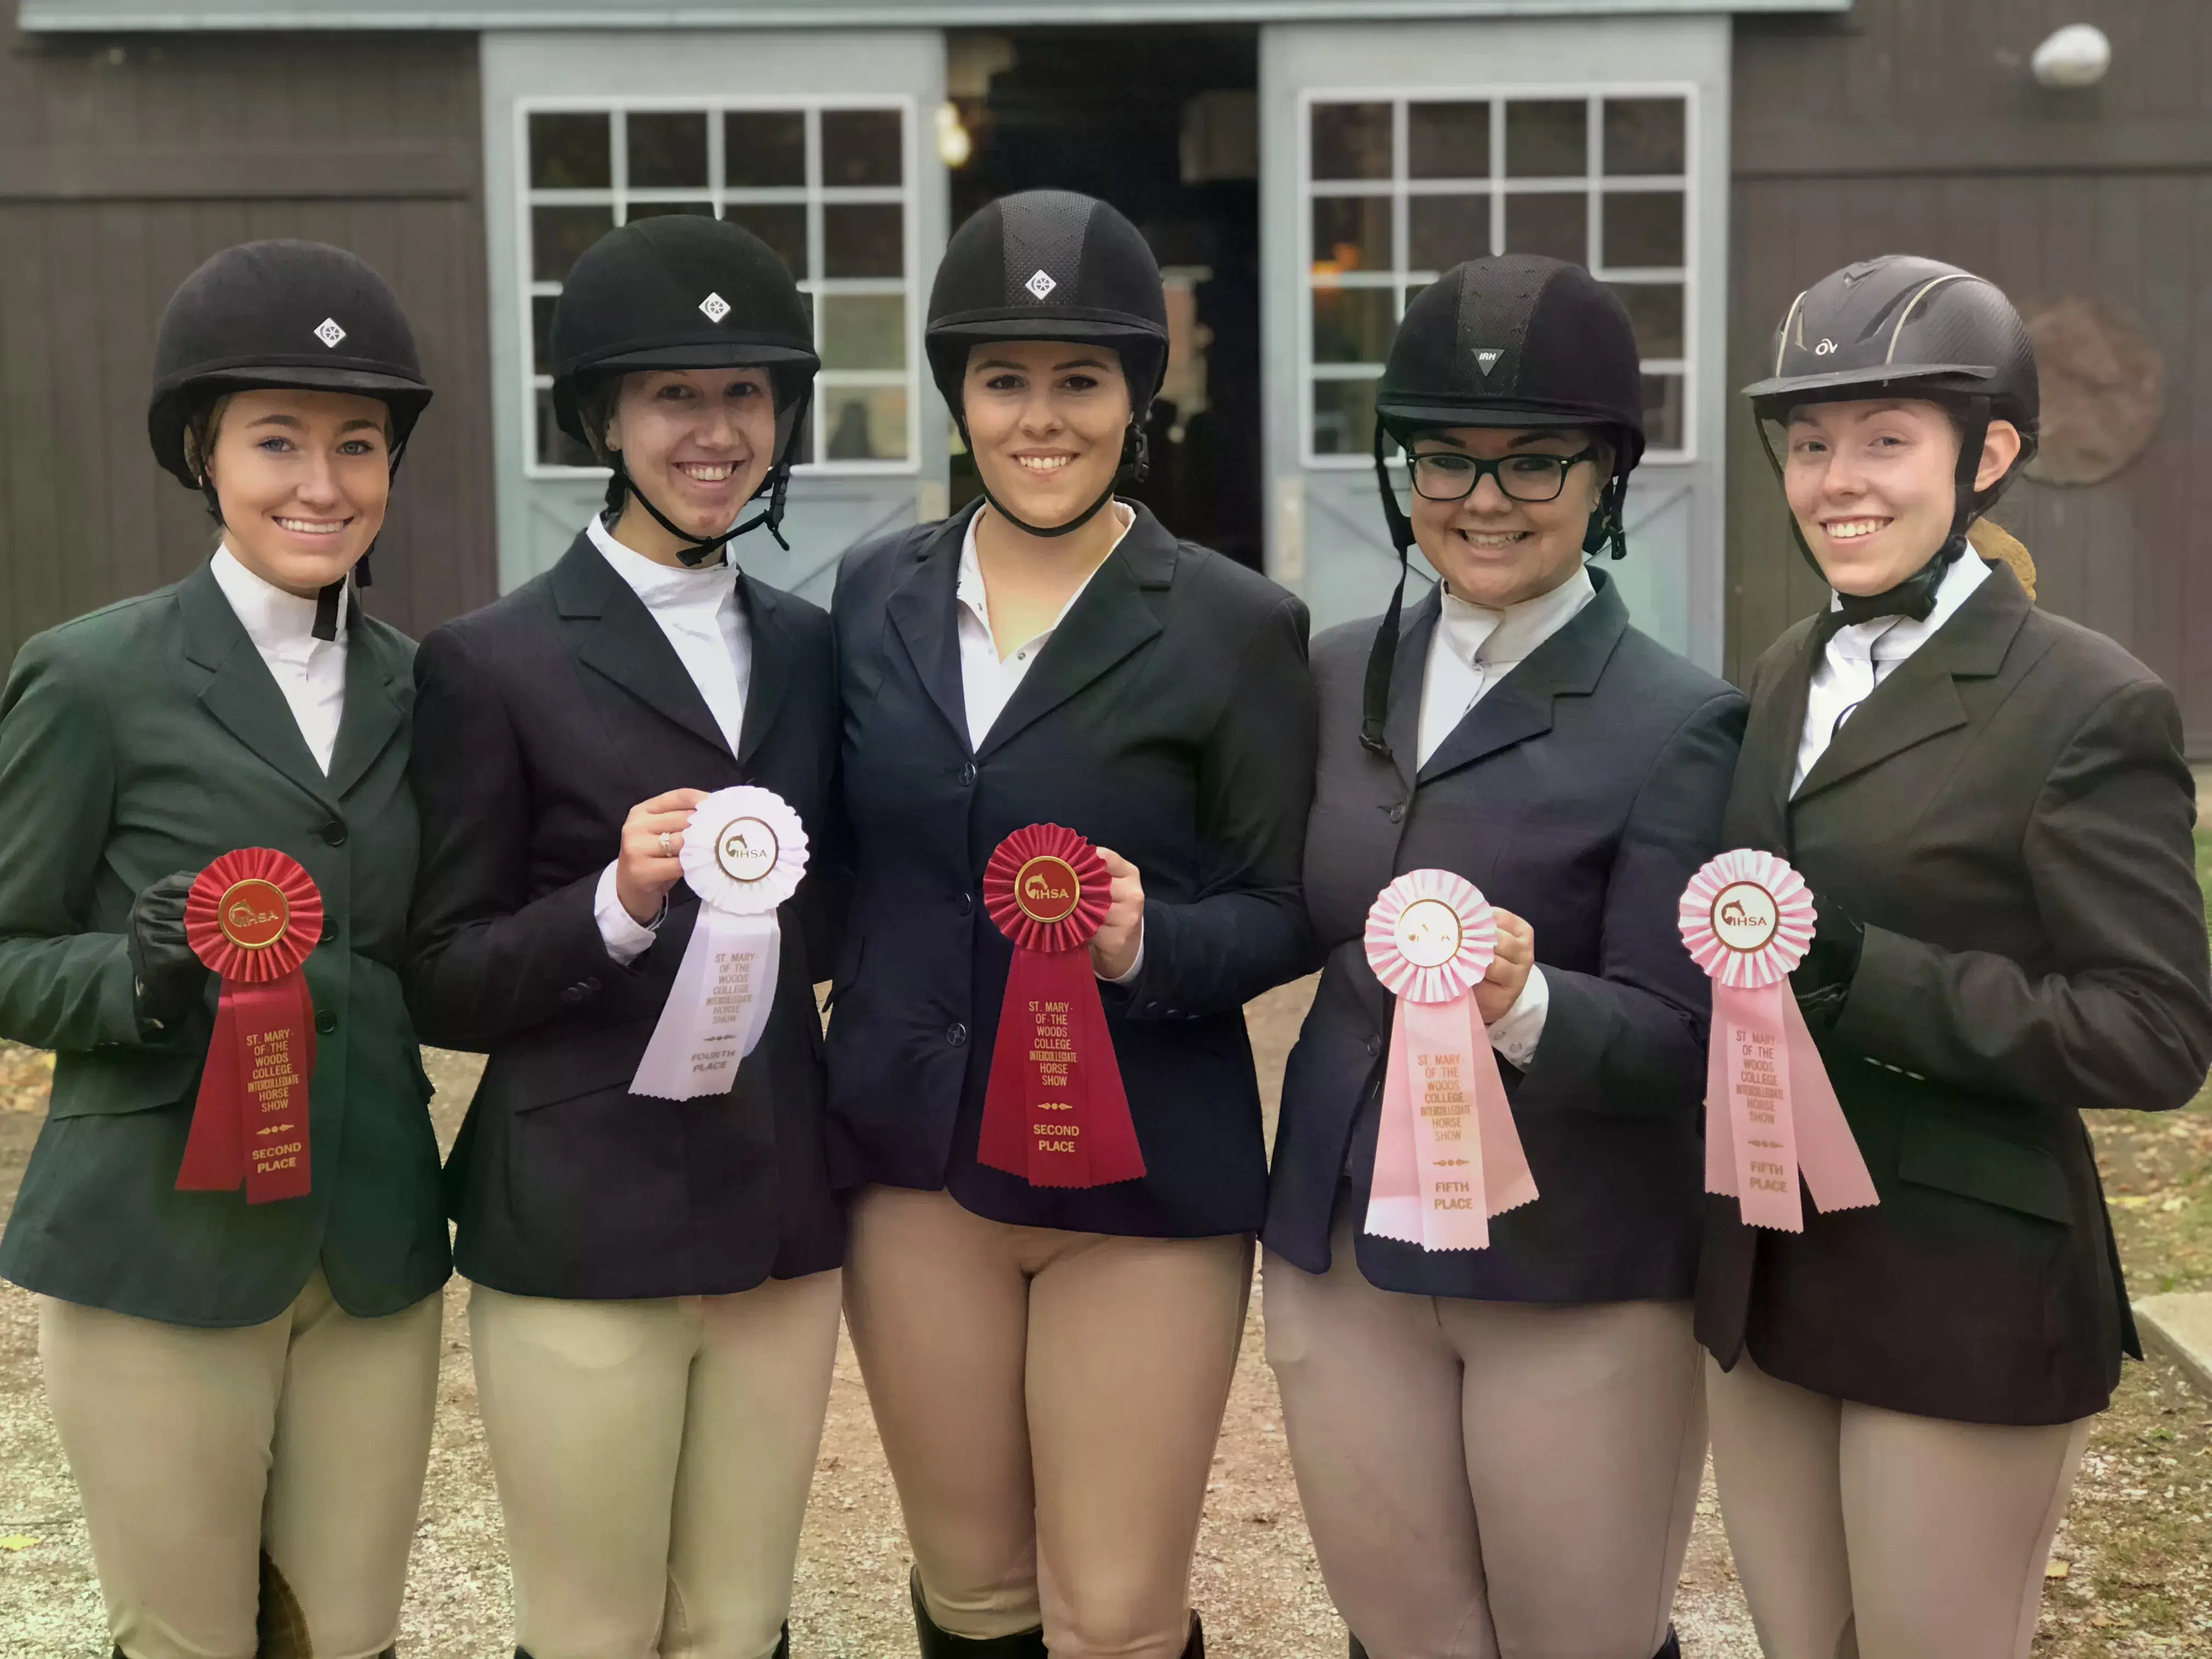 The Equestrian Team outside holding their ribbons with helmets on